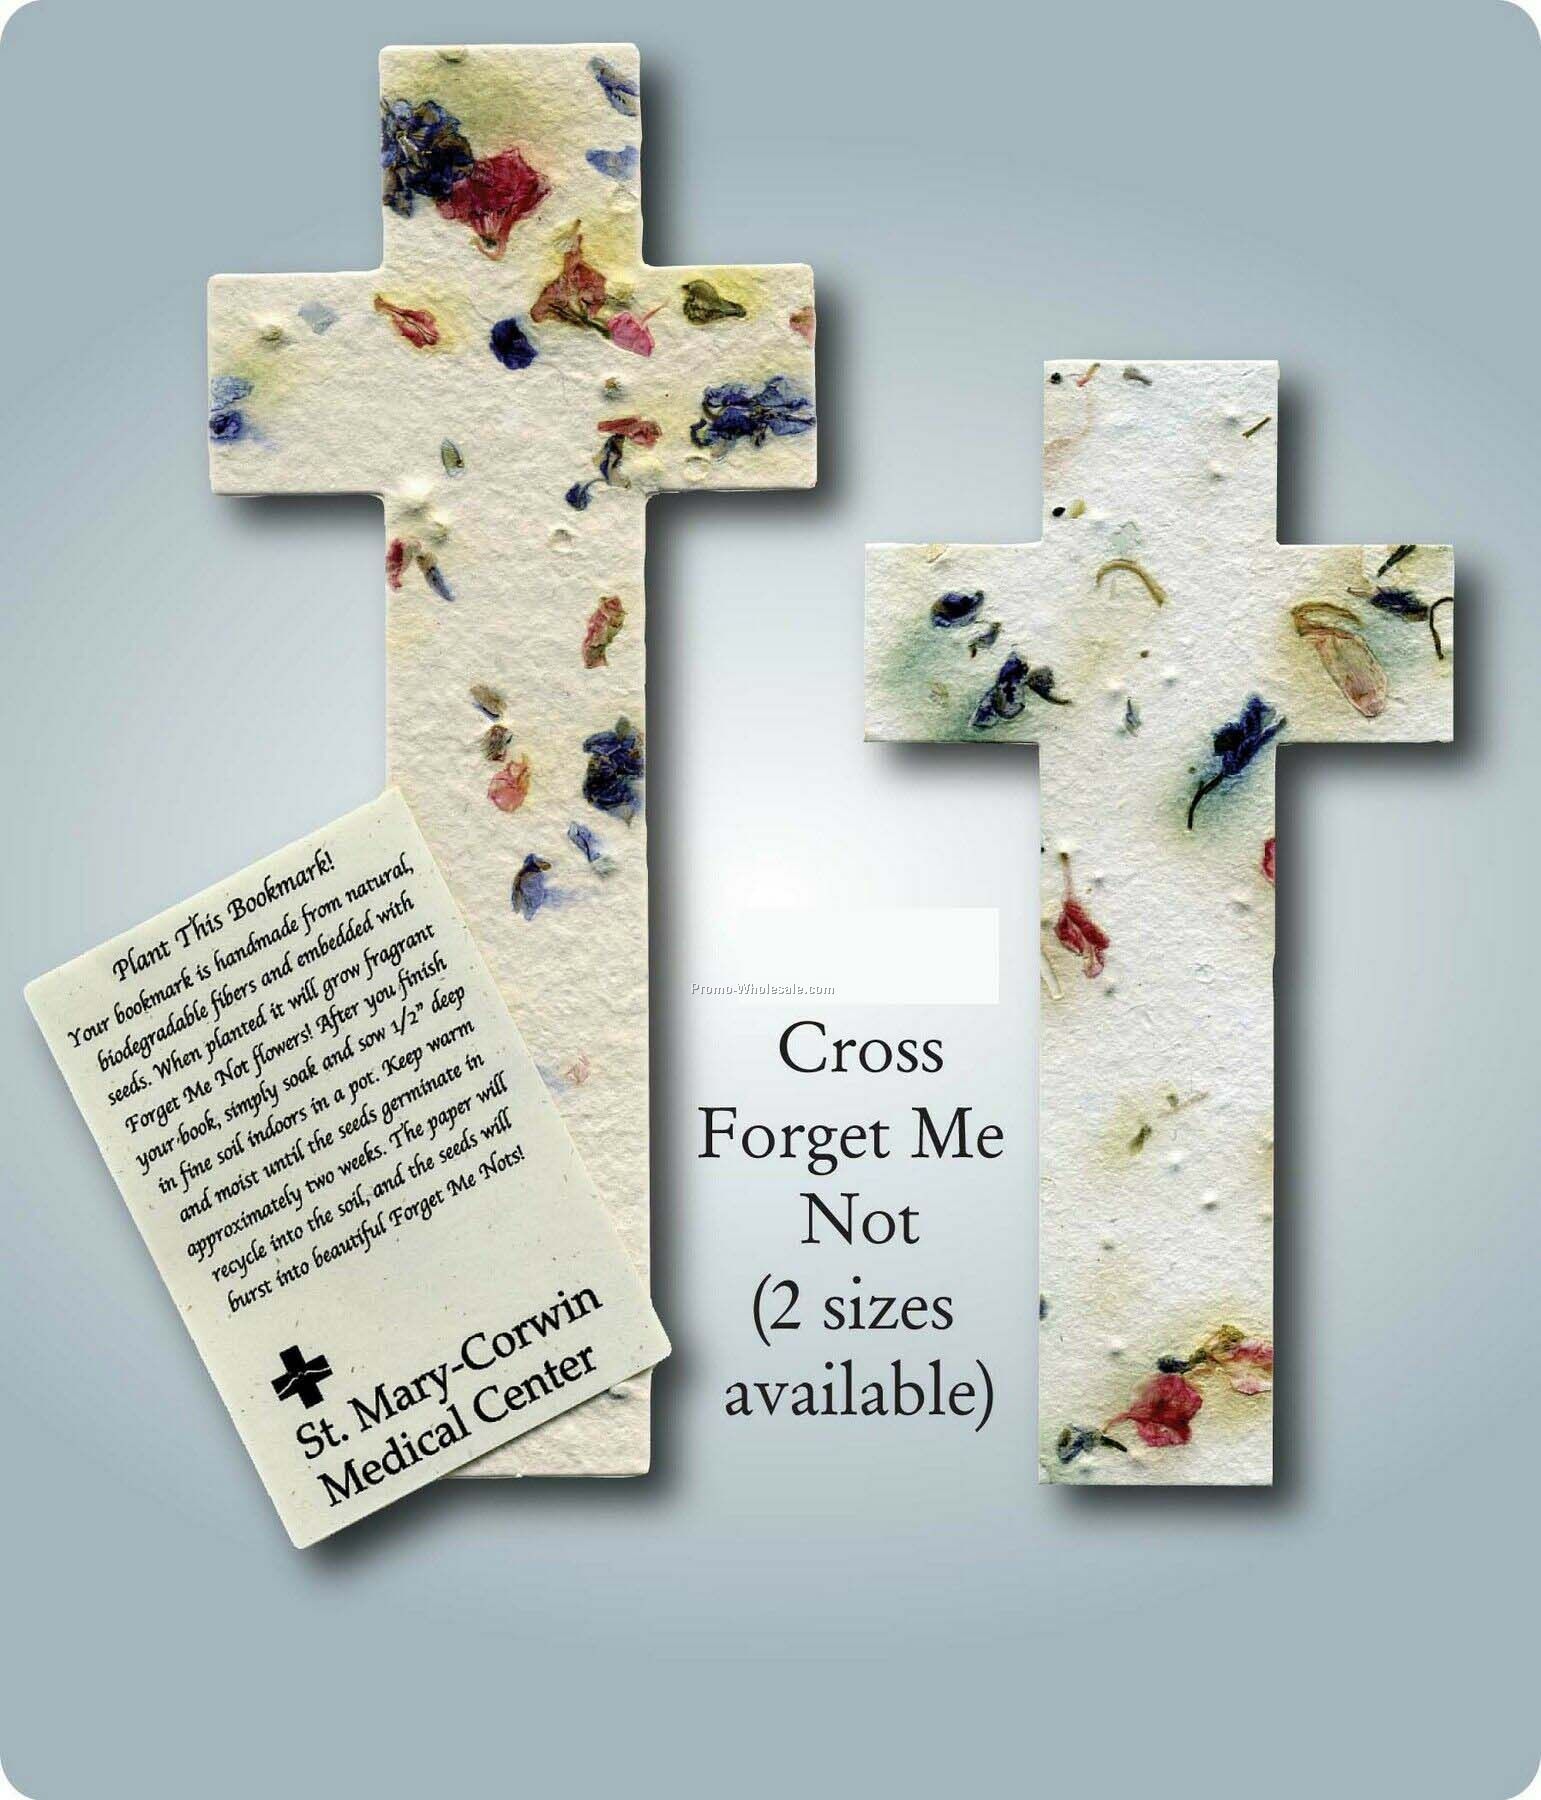 Cross Bookmark Embedded W/ Forget Me Not Seed